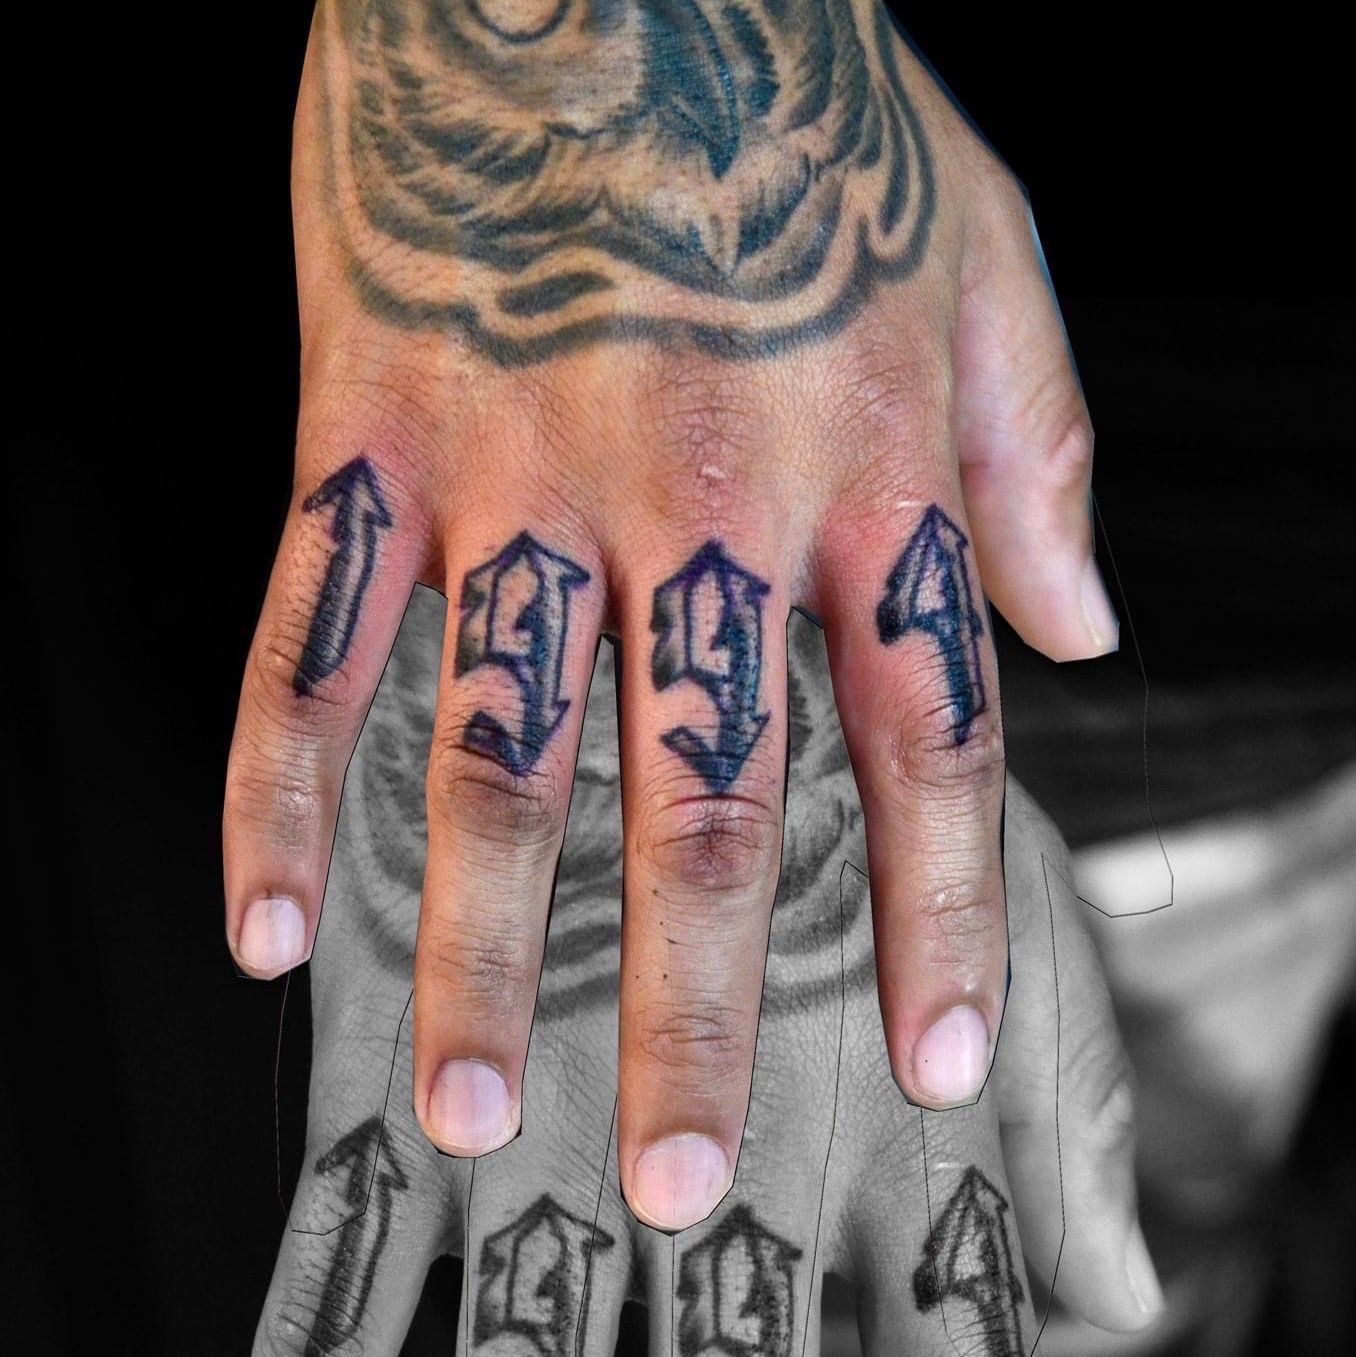 Studio27 / Tattoo only - Nice old school feel to these finger tattoos  🤘🤘🤘🤘👌 | Facebook